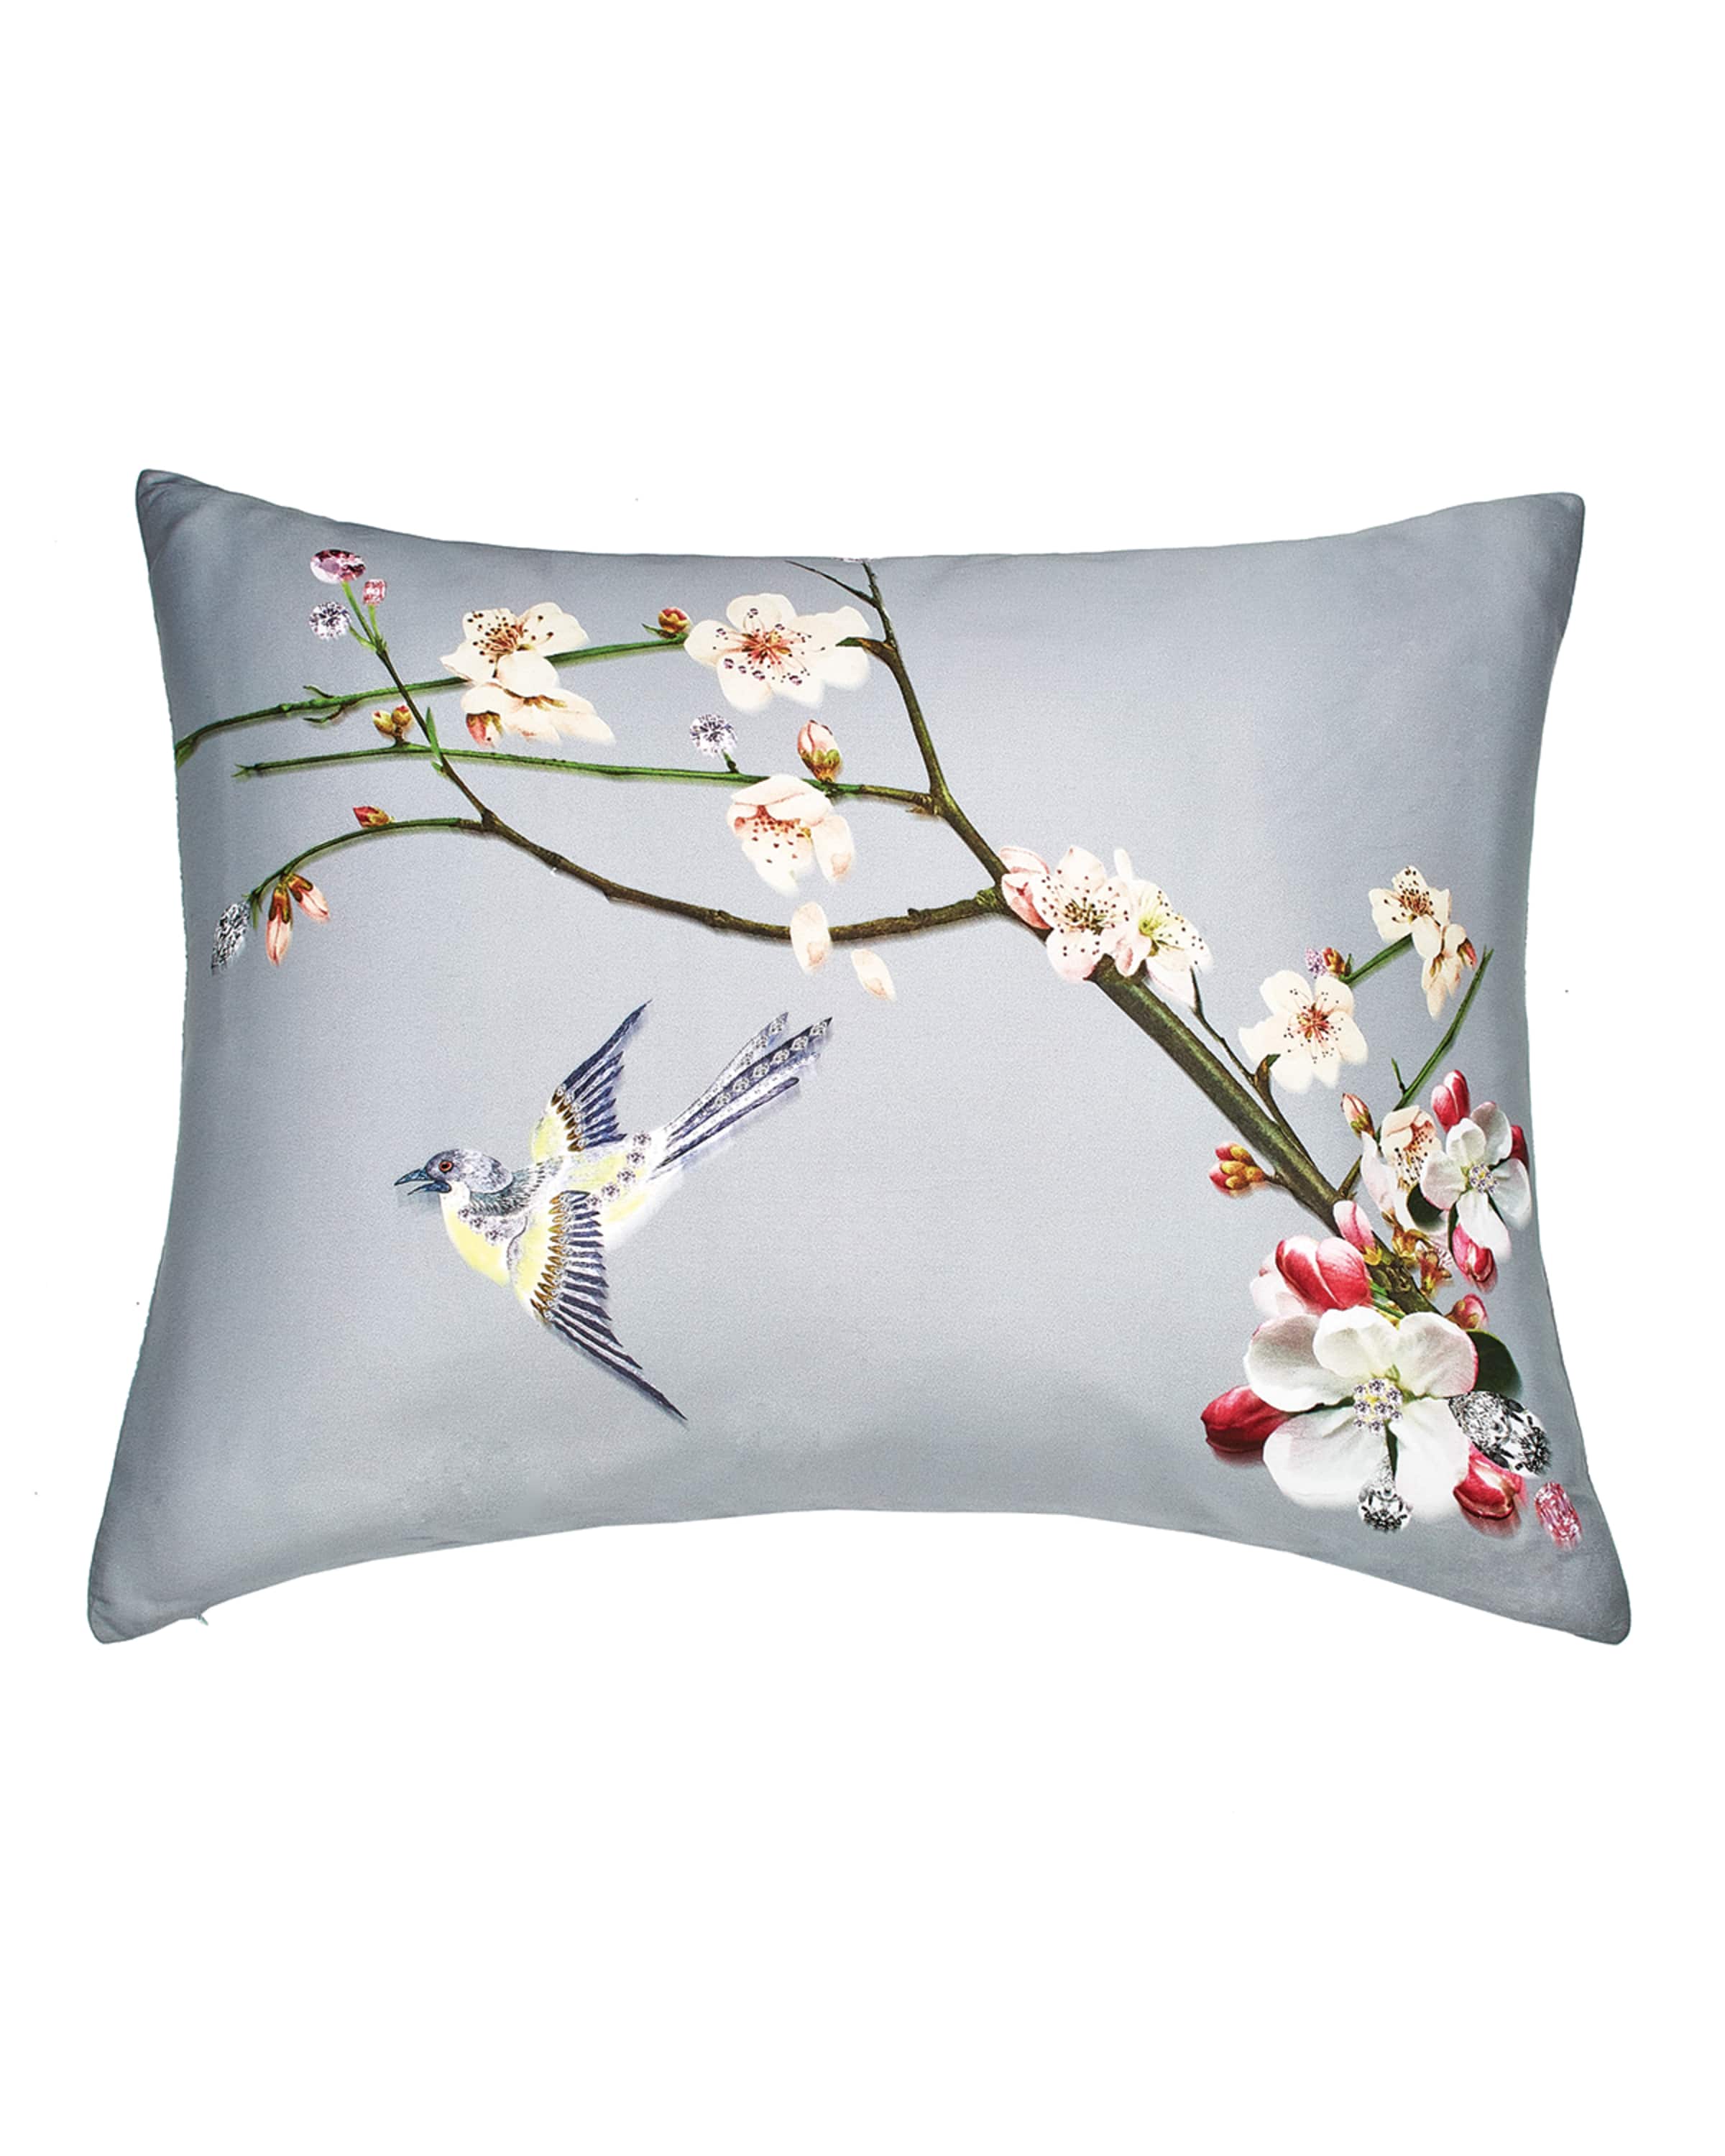 Ted Baker London Printed Bird Embroidered Pillow